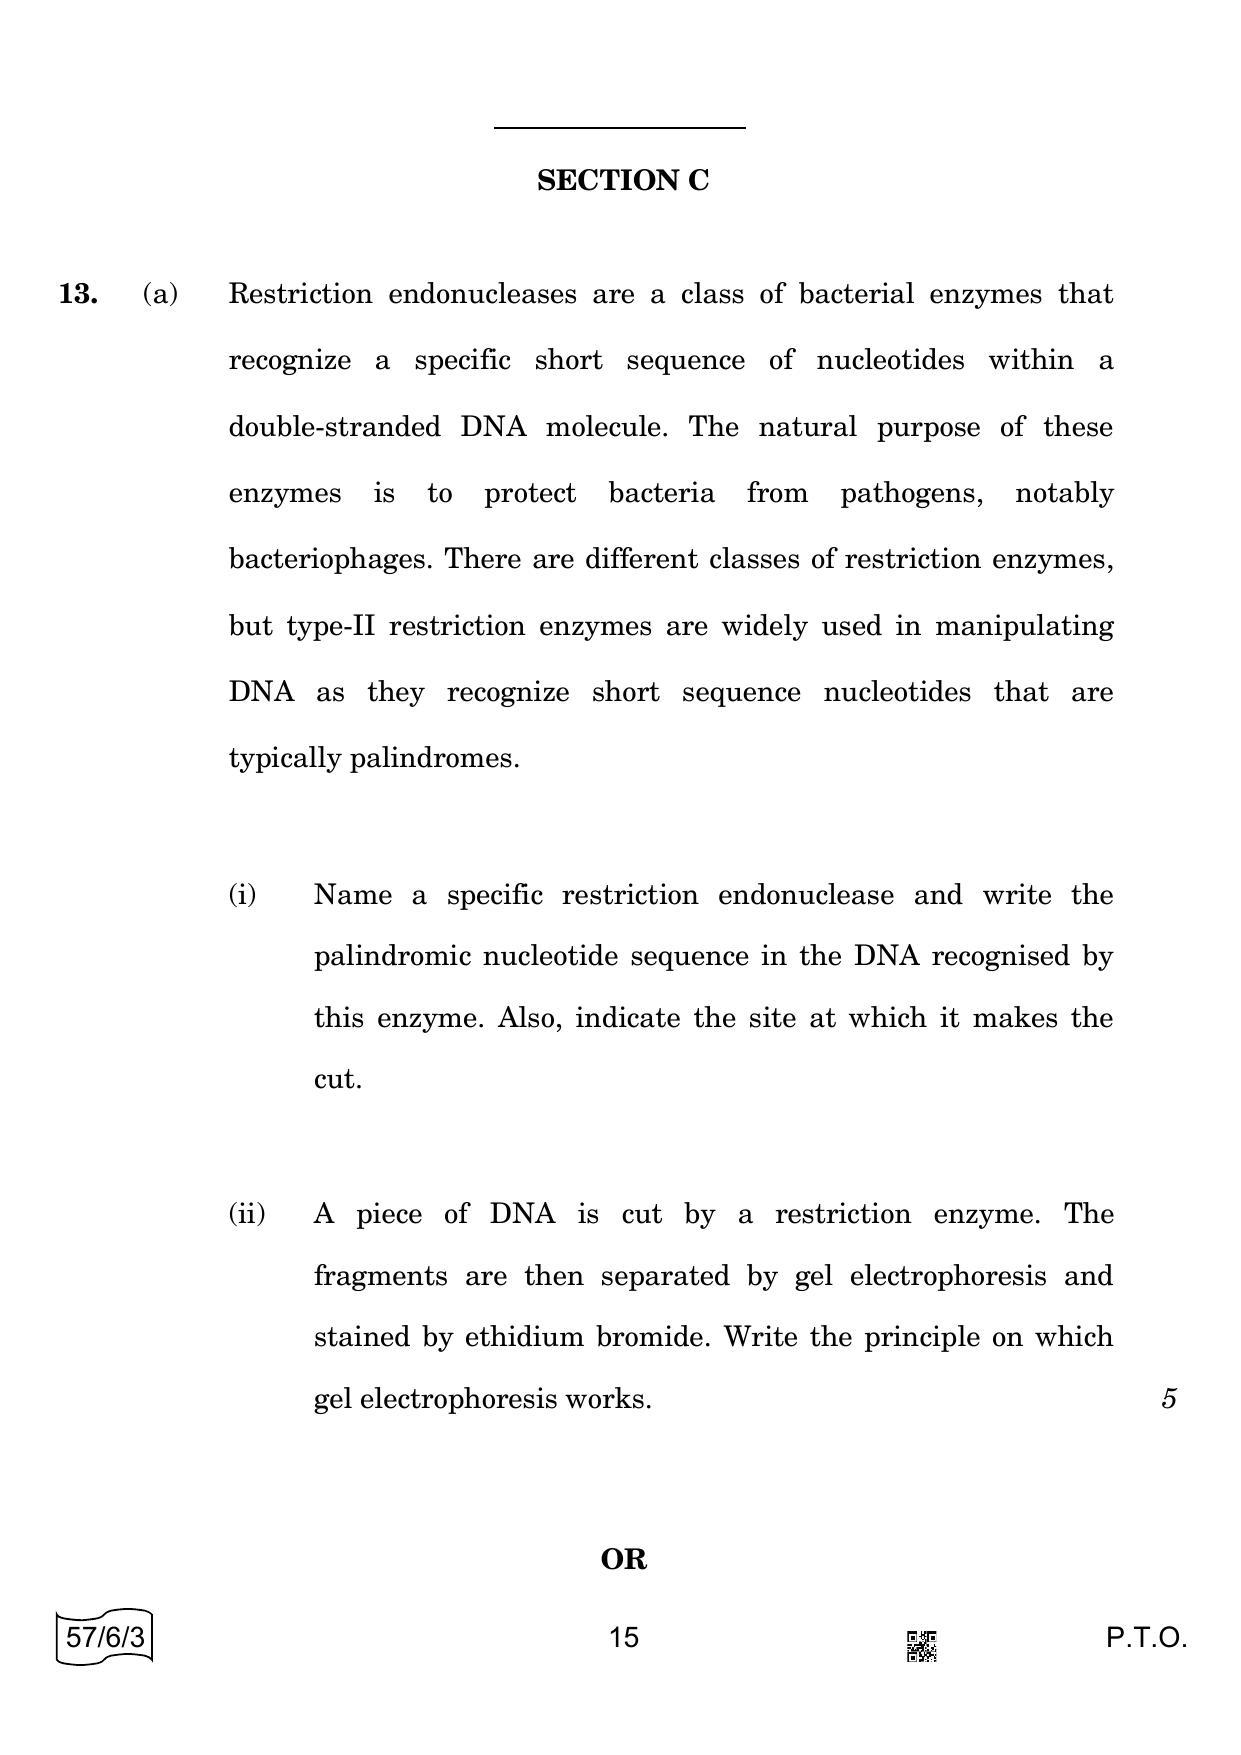 CBSE Class 12 57-6-3 BIOLOGY 2022 Compartment Question Paper - Page 15